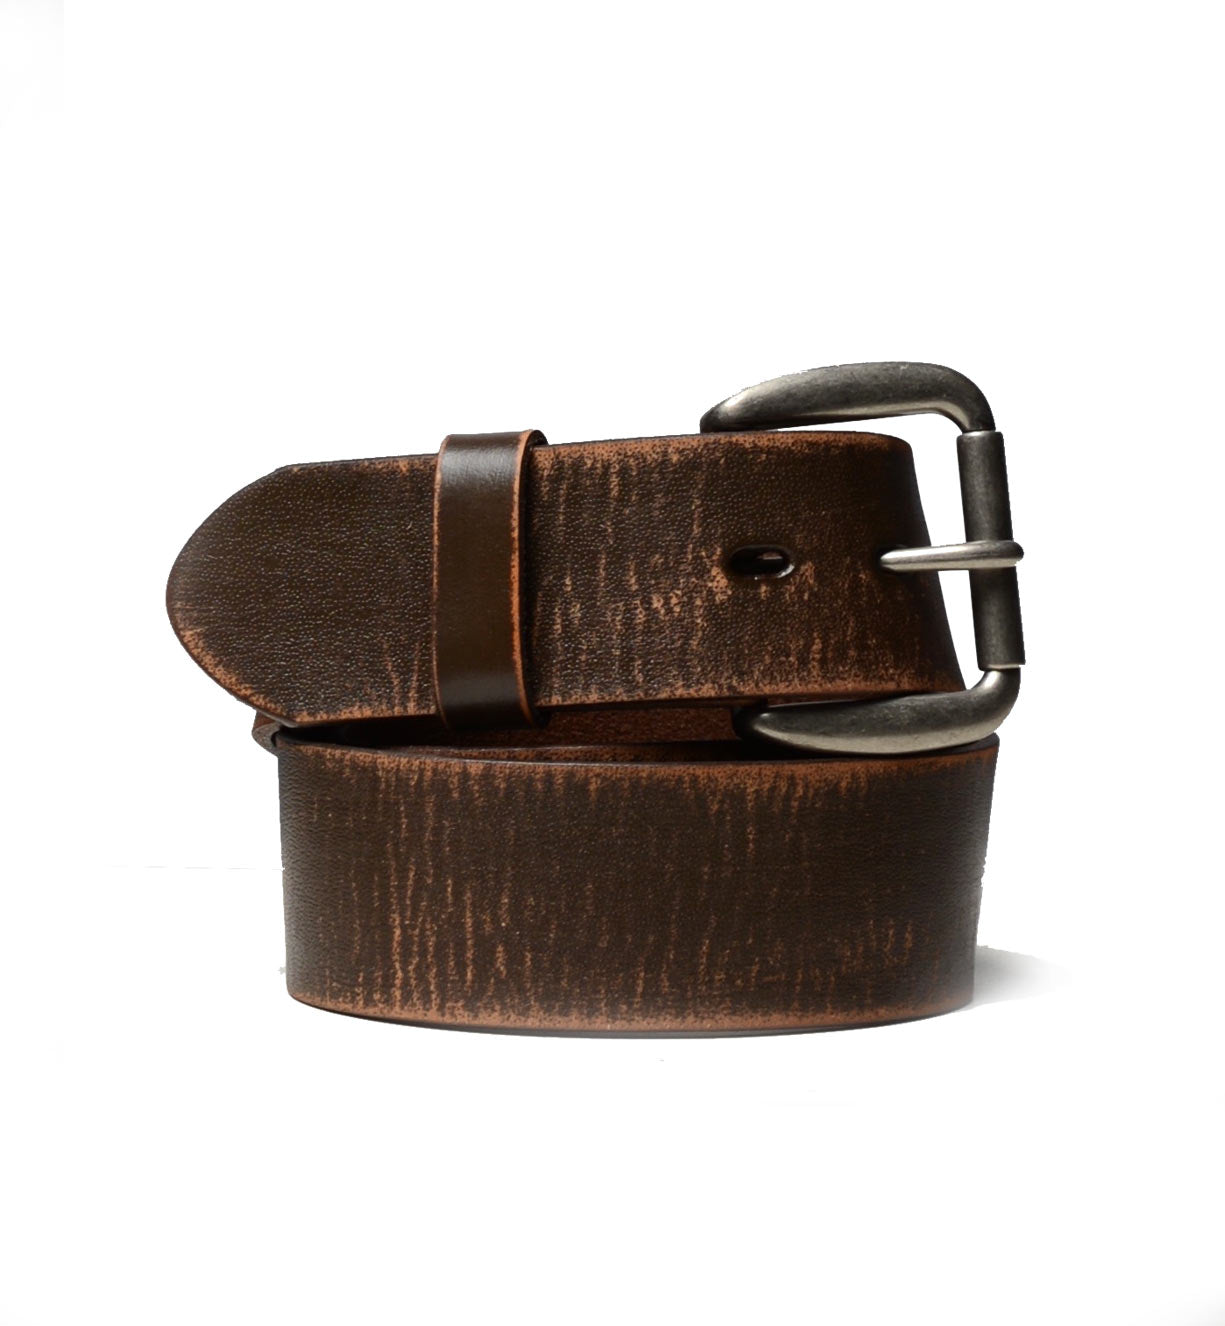 A Hobo brown leather belt on a white background by Bed Stu.